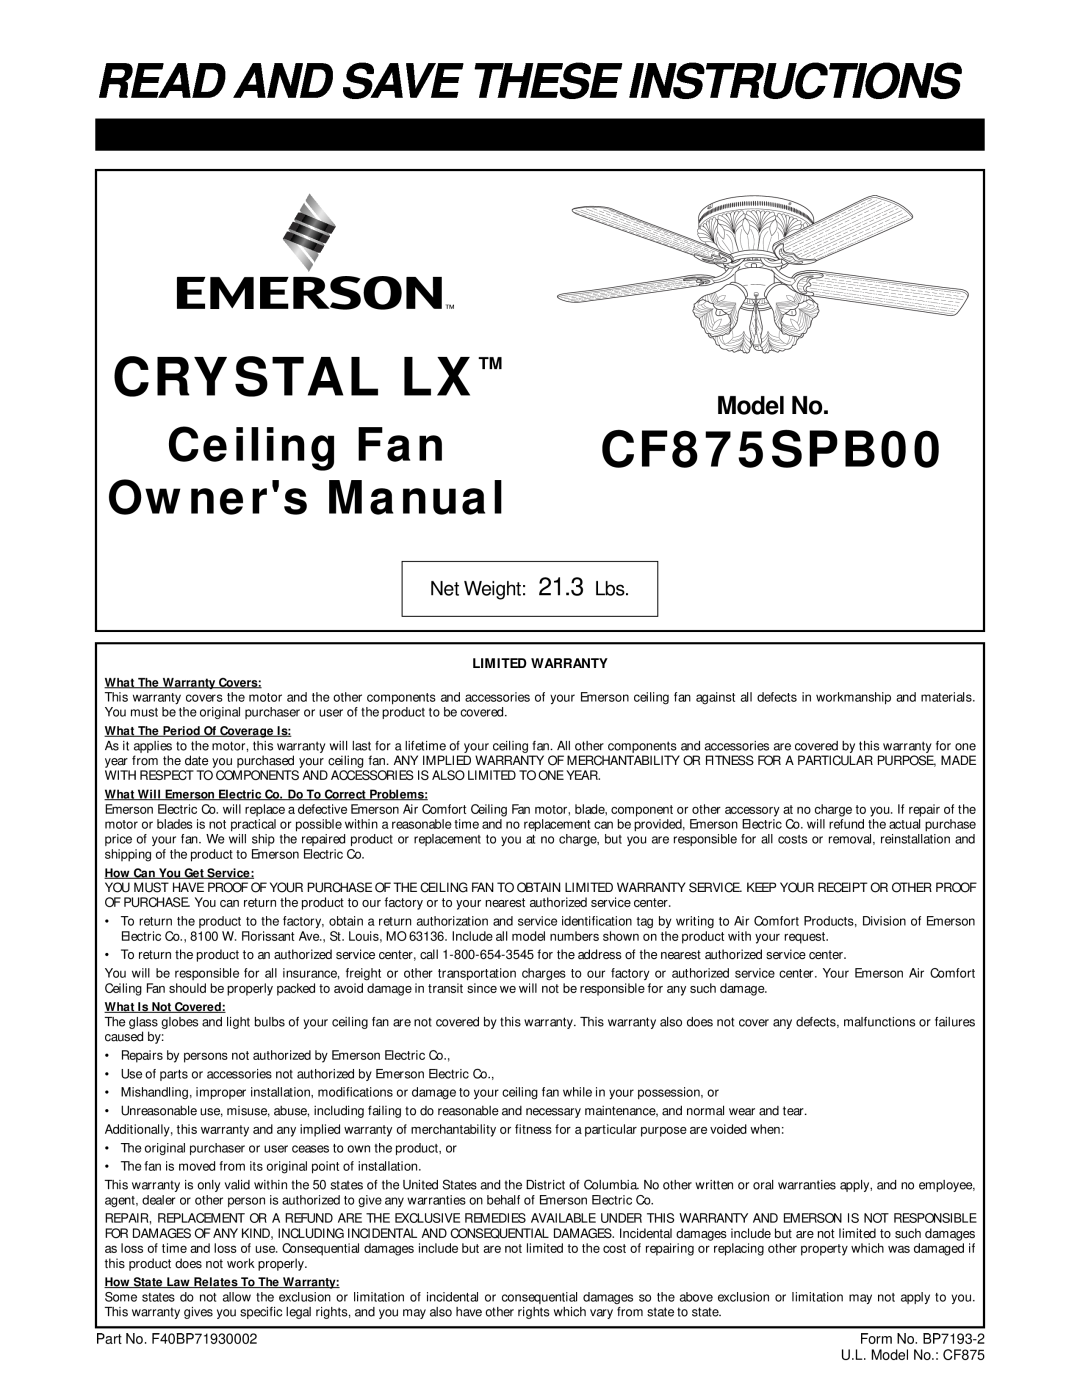 Emerson warranty Crystal Lx, CF875SPB00, Read And Save These Instructions, Ceiling Fan, Model No, What Is Not Covered 